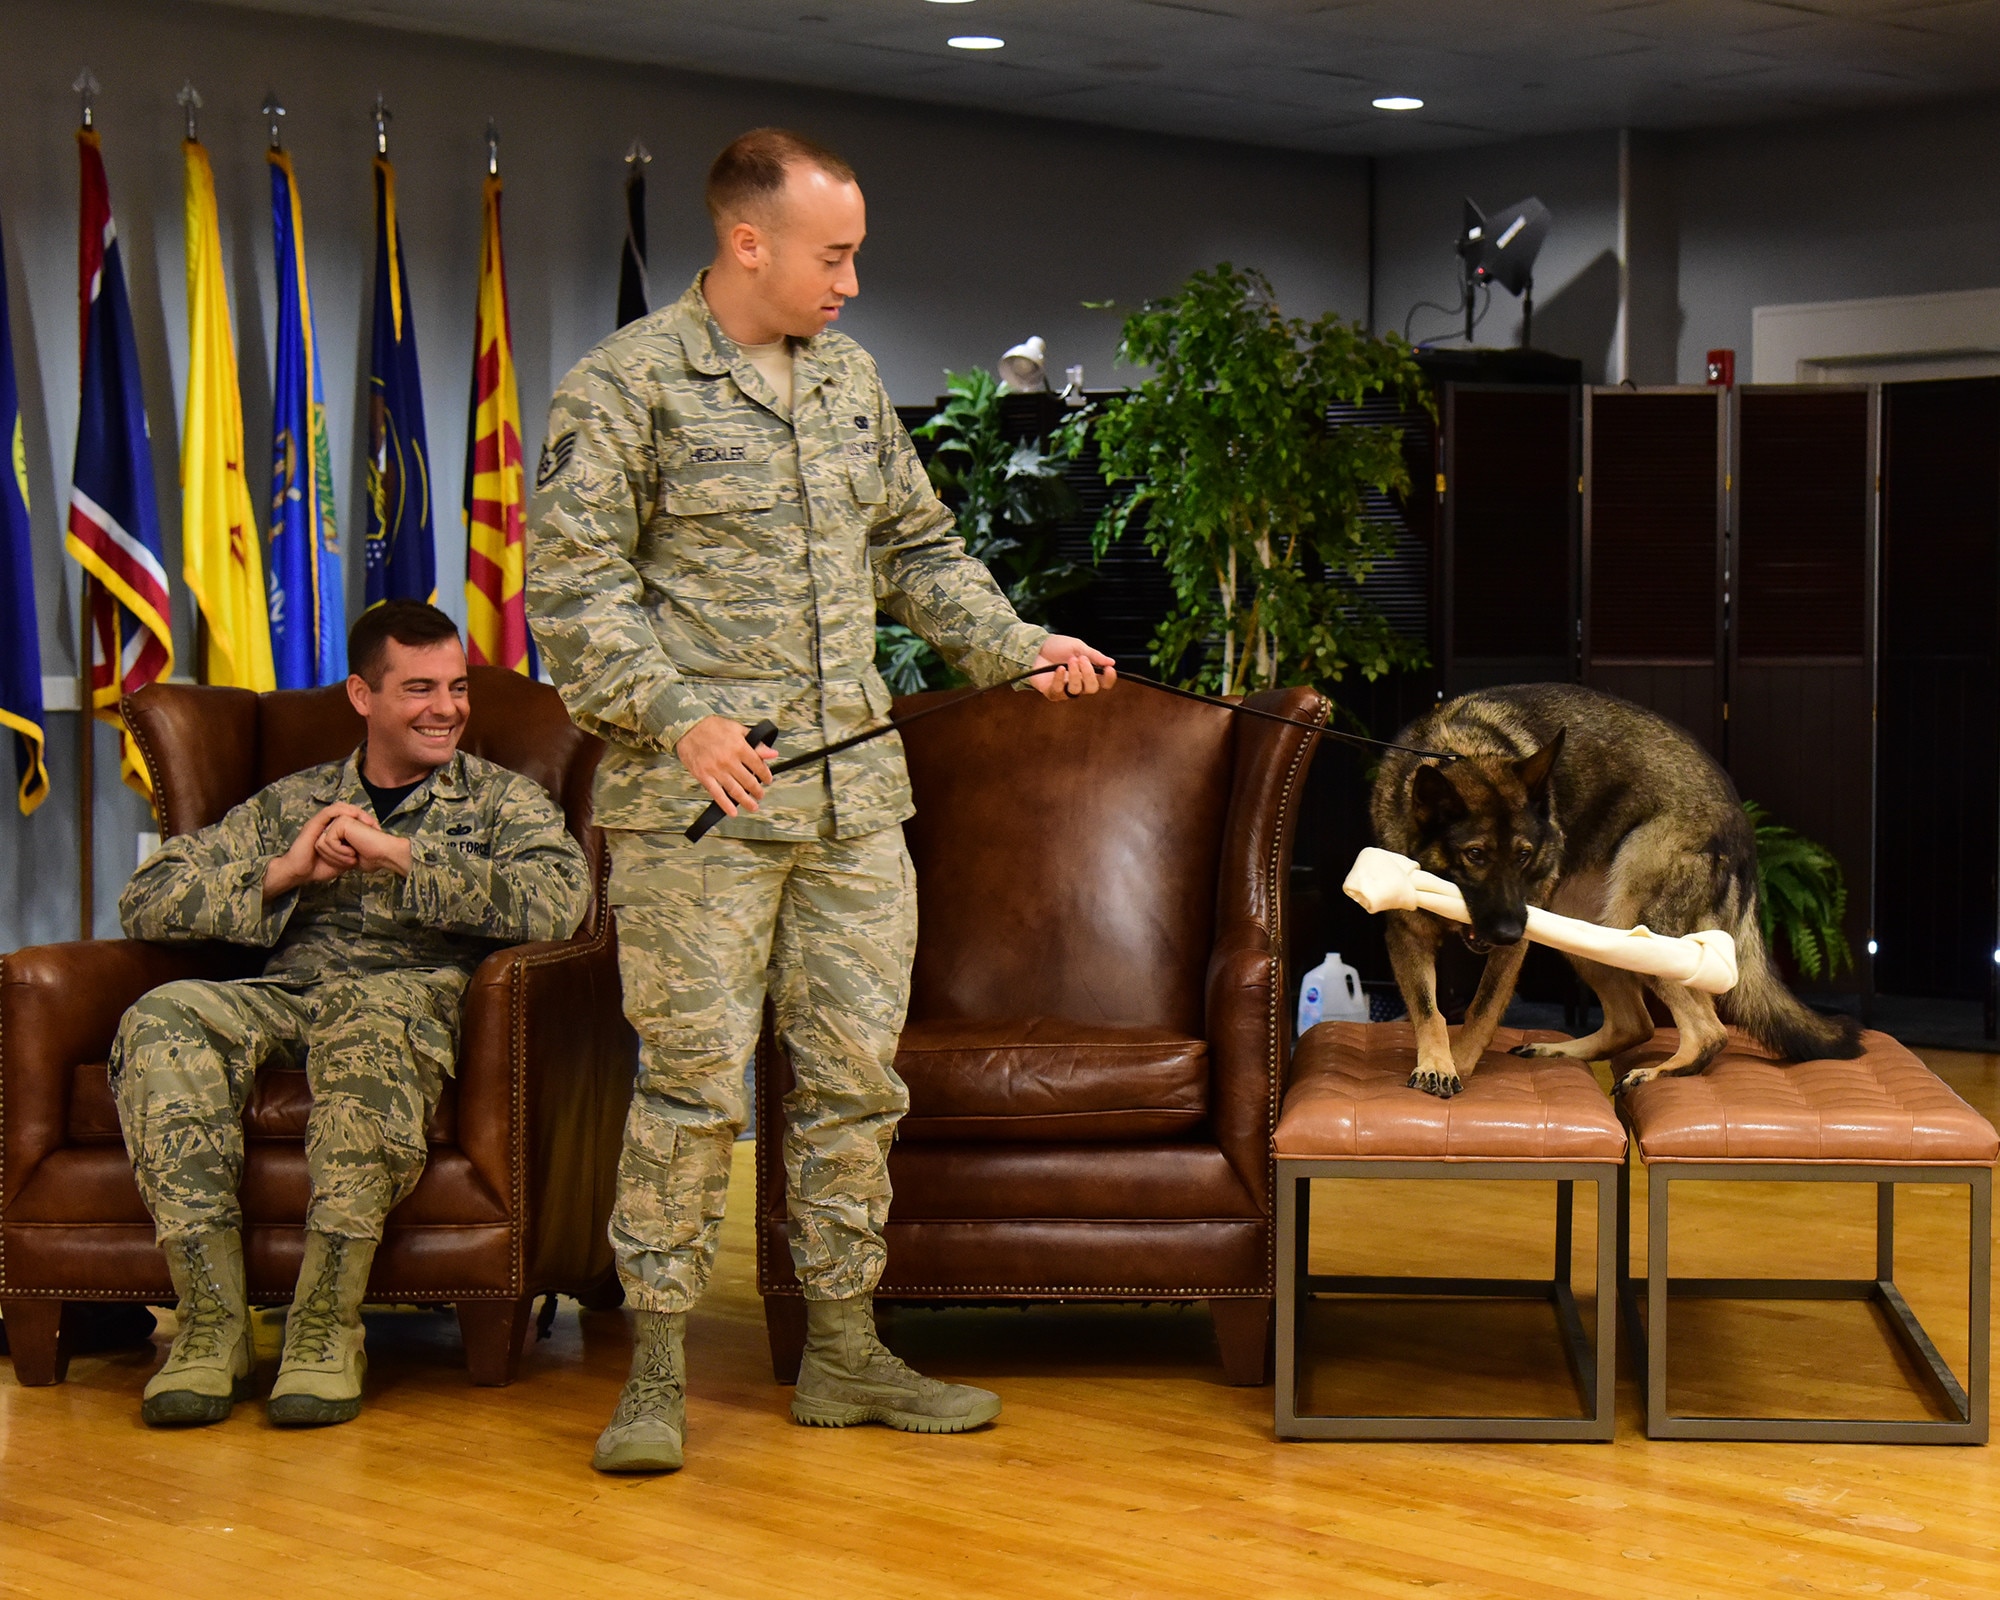 Staff Sgt. Nicholas Heckler, former 14th Security Forces Squadron military working dog handler, prepares to walk with newly retired MWD Cherry, during her retirement ceremony Aug. 24, 2018, on Columbus Air Force Base, Mississippi. Cherry retired after serving the Air Force for 10 years, and will go on to live with Heckler. (U.S. Air Force photo by Elizabeth Owens)